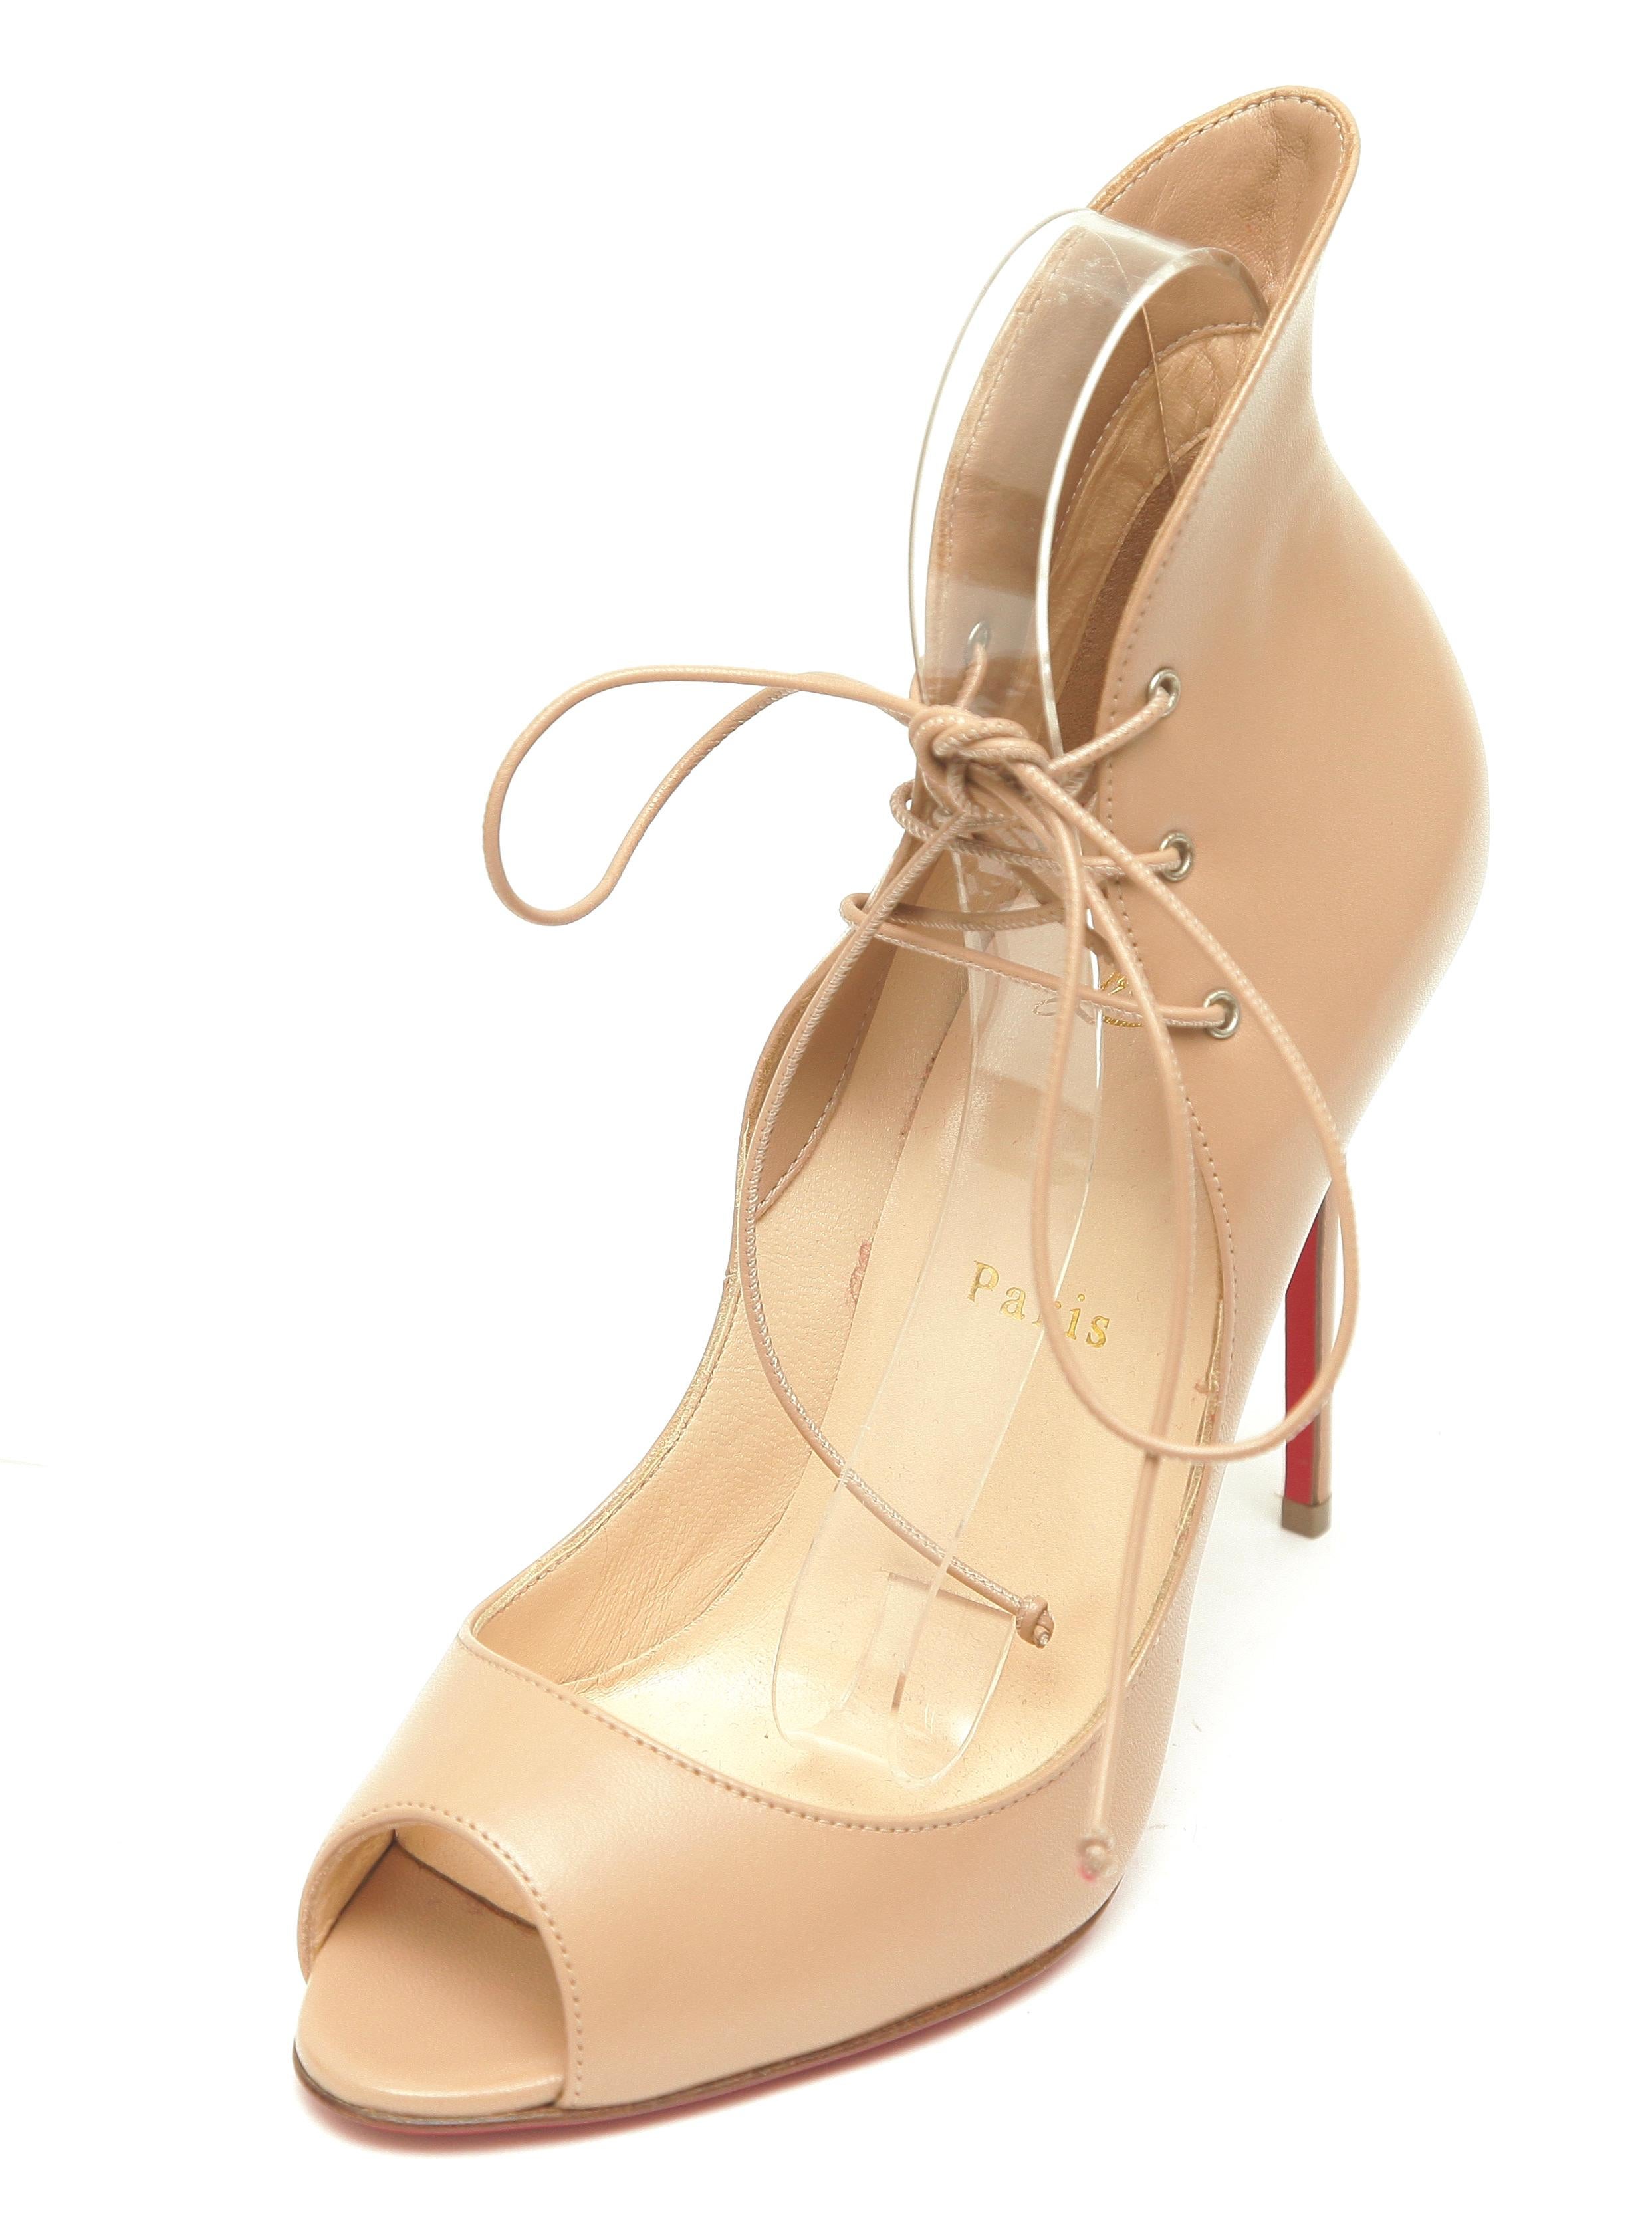 CHRISTIAN LOUBOUTIN Beige Leather MEGAVAMP Pump Laces Peep Toe Red Sole Sz 38 In New Condition For Sale In Hollywood, FL